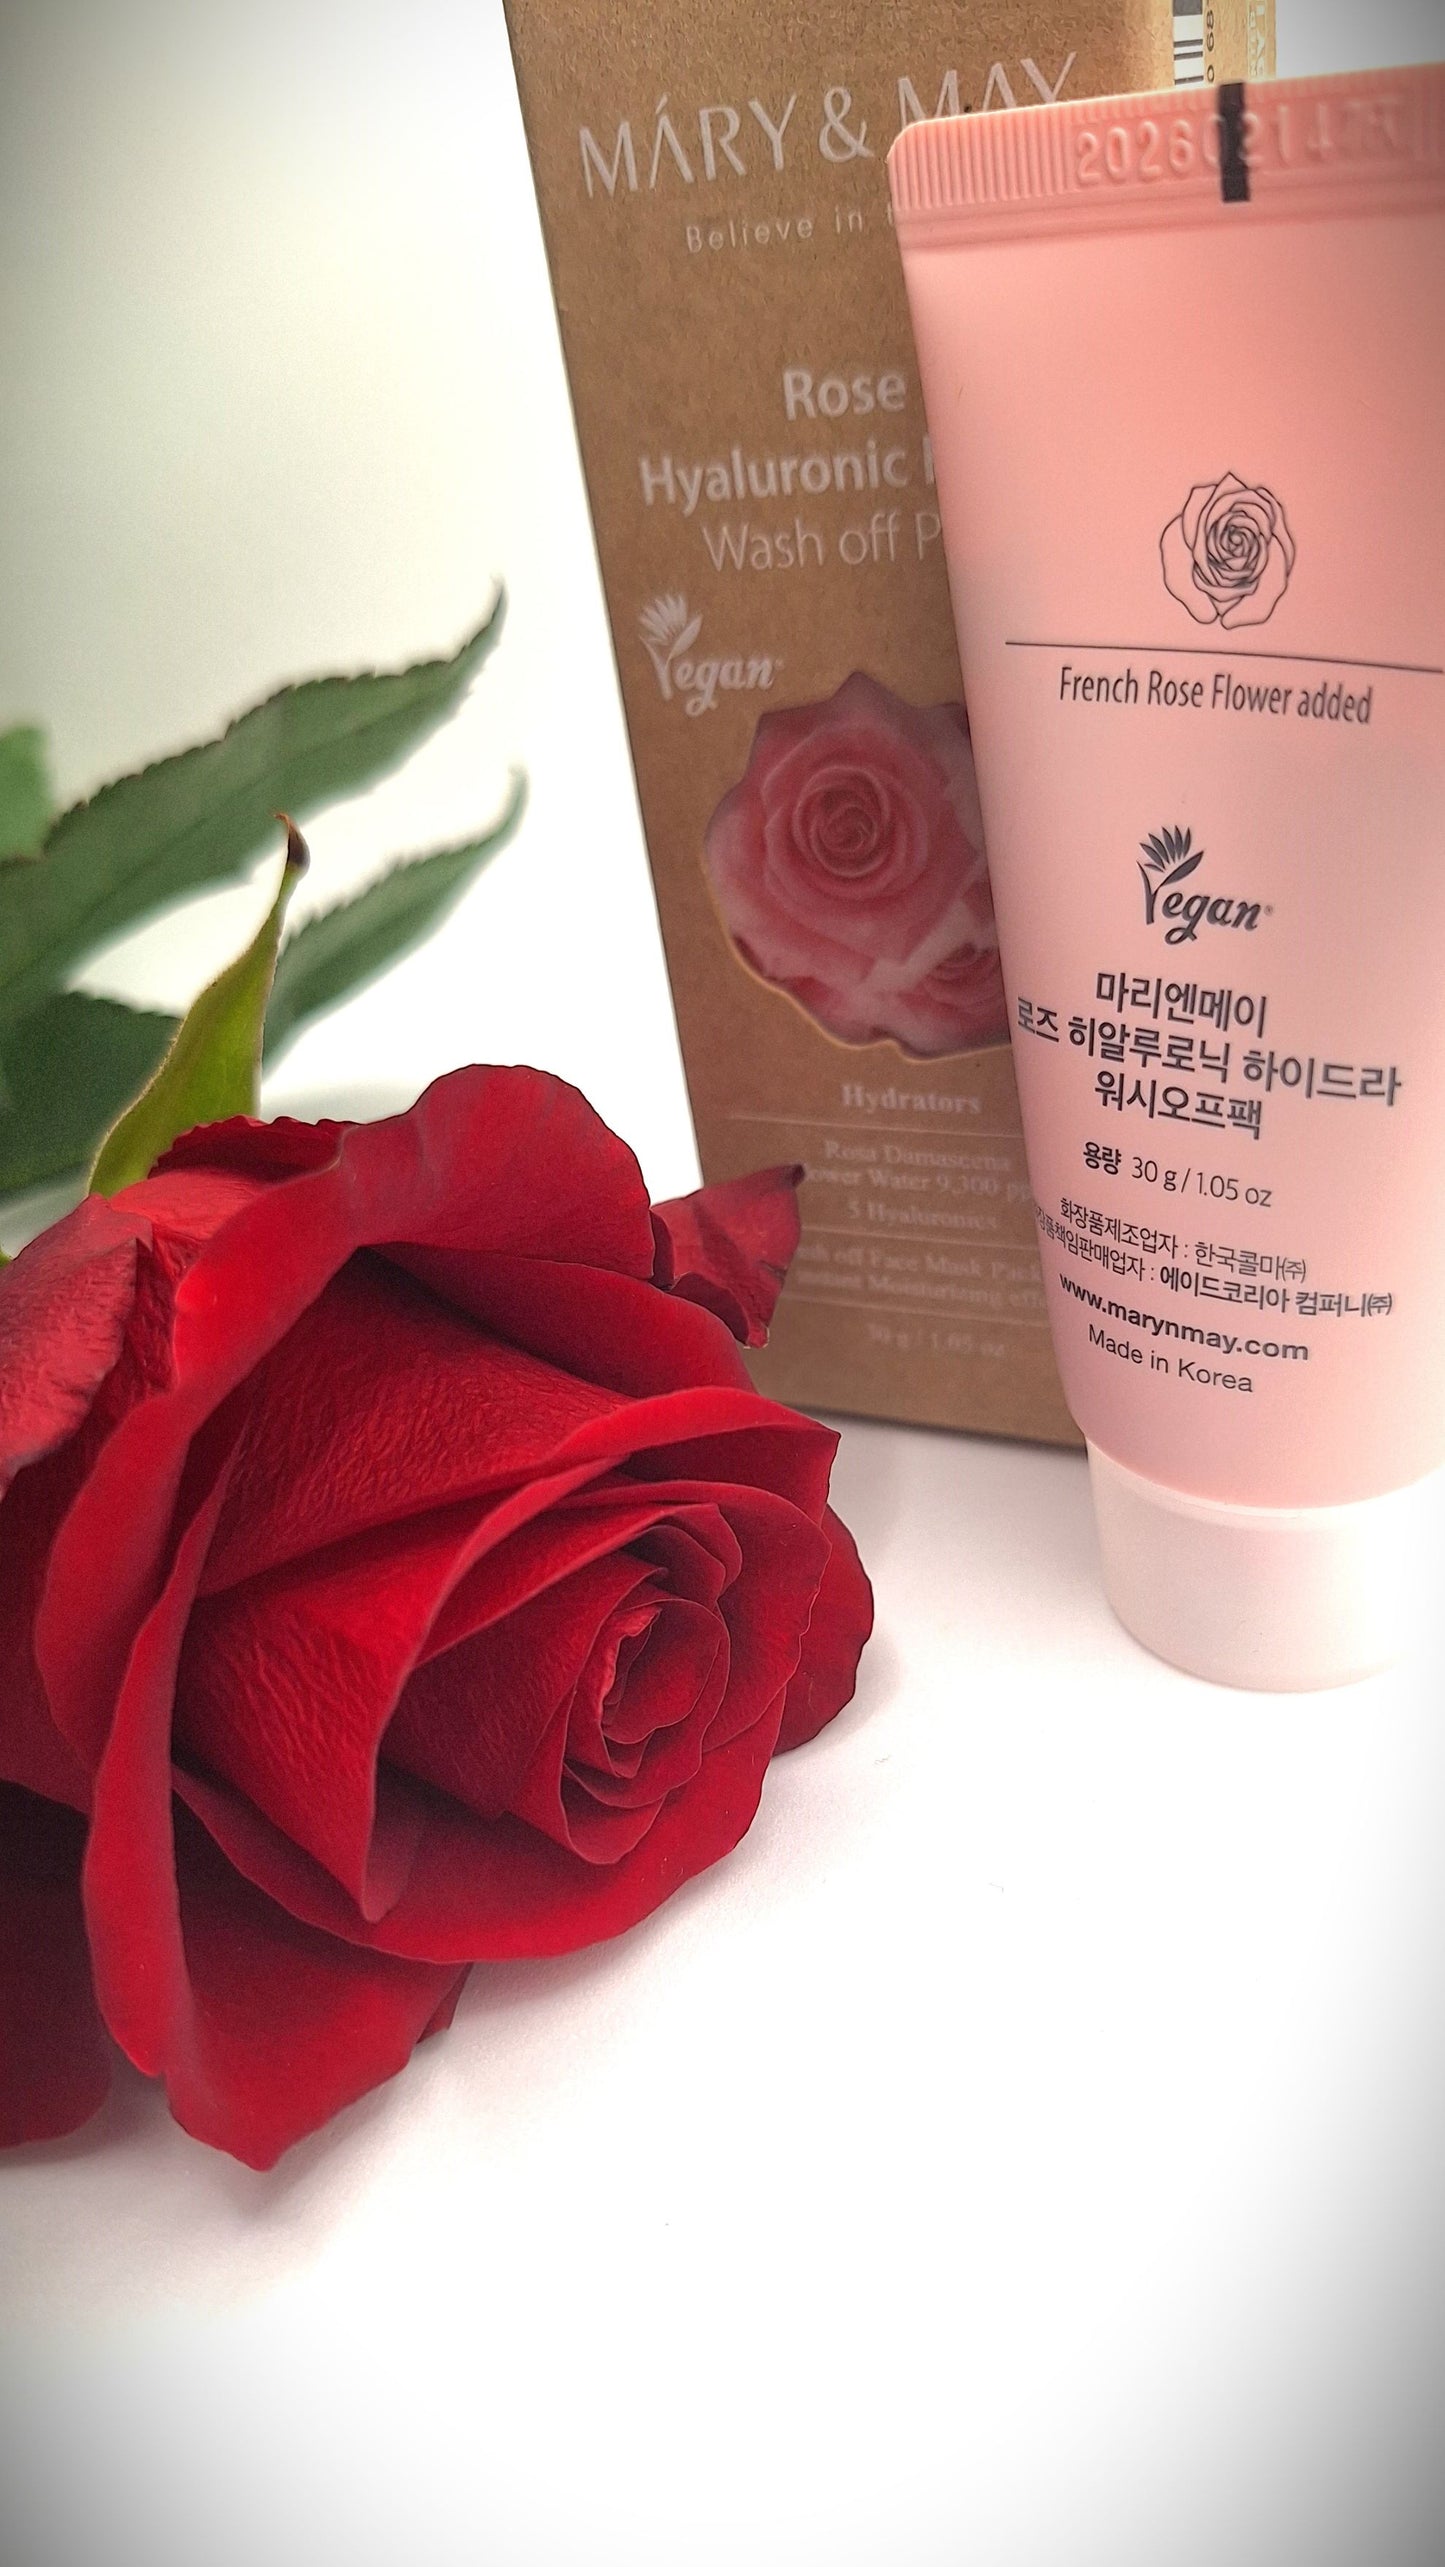 Mary & May Rose Hyaluronic Hydra Wash off Face Mask